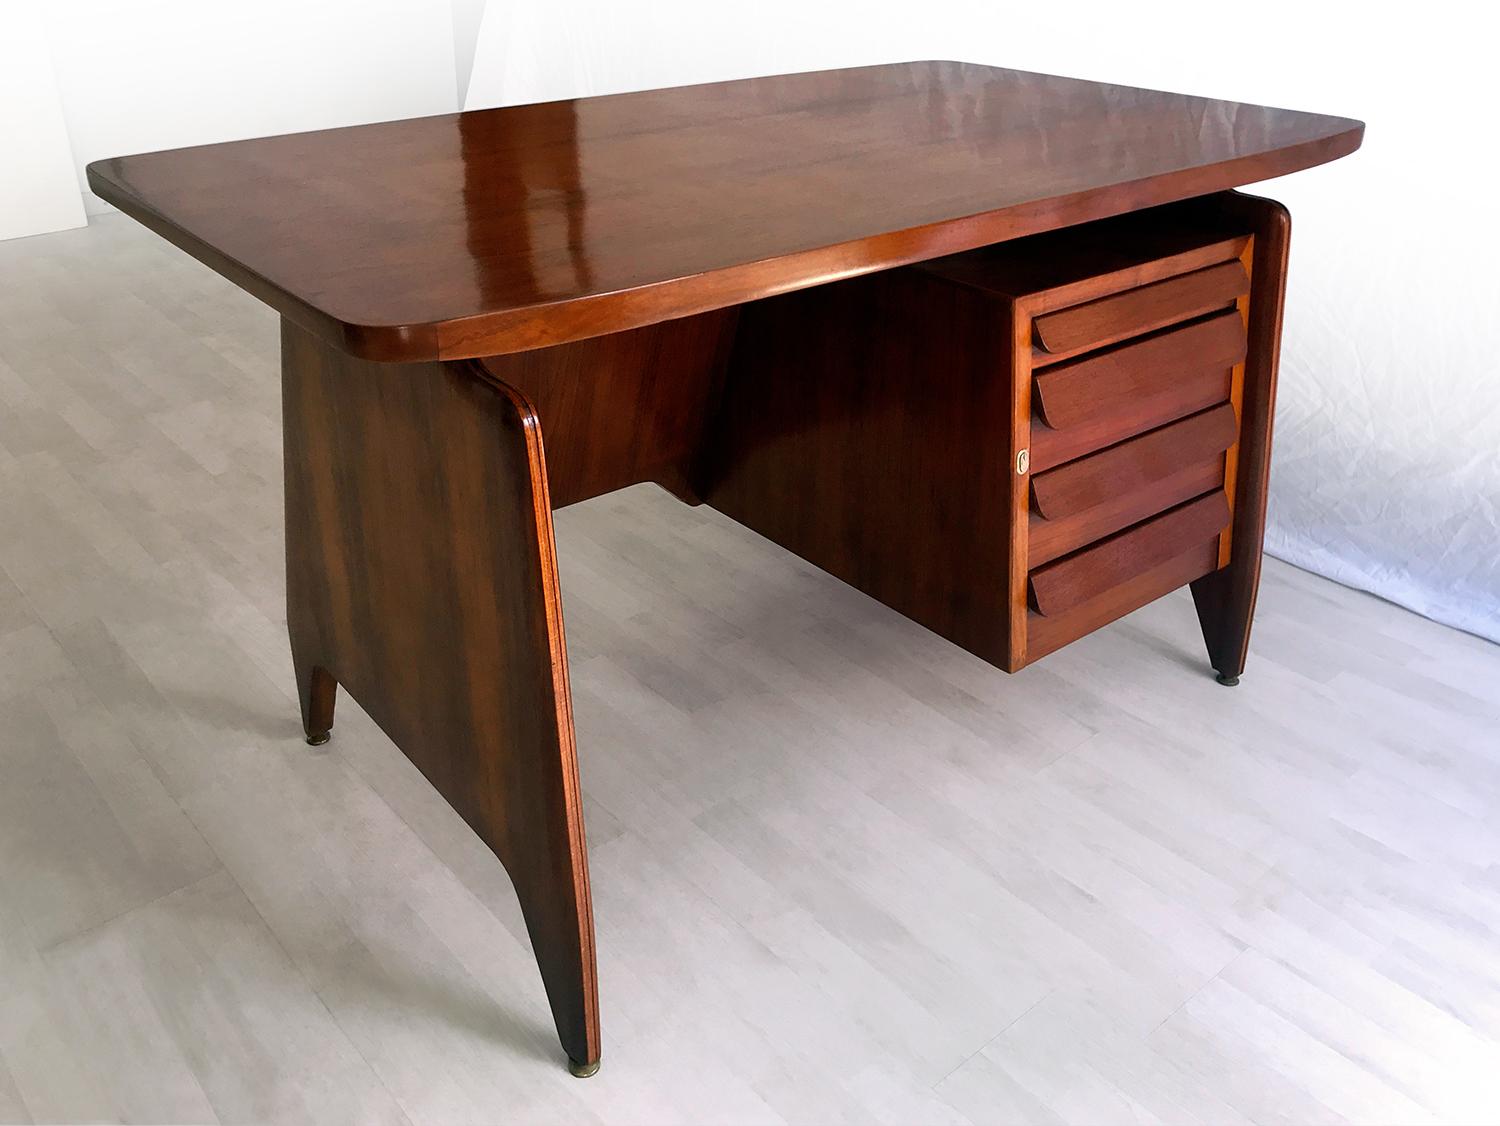 Stylish writing desk well designed by Vittorio Dassi in the 1950s as expression of Gio Ponti, fruit of their collaboration during 1950s and 1960s.
The structure is made of teakwood, finished with brass feet, and provided with four drawers